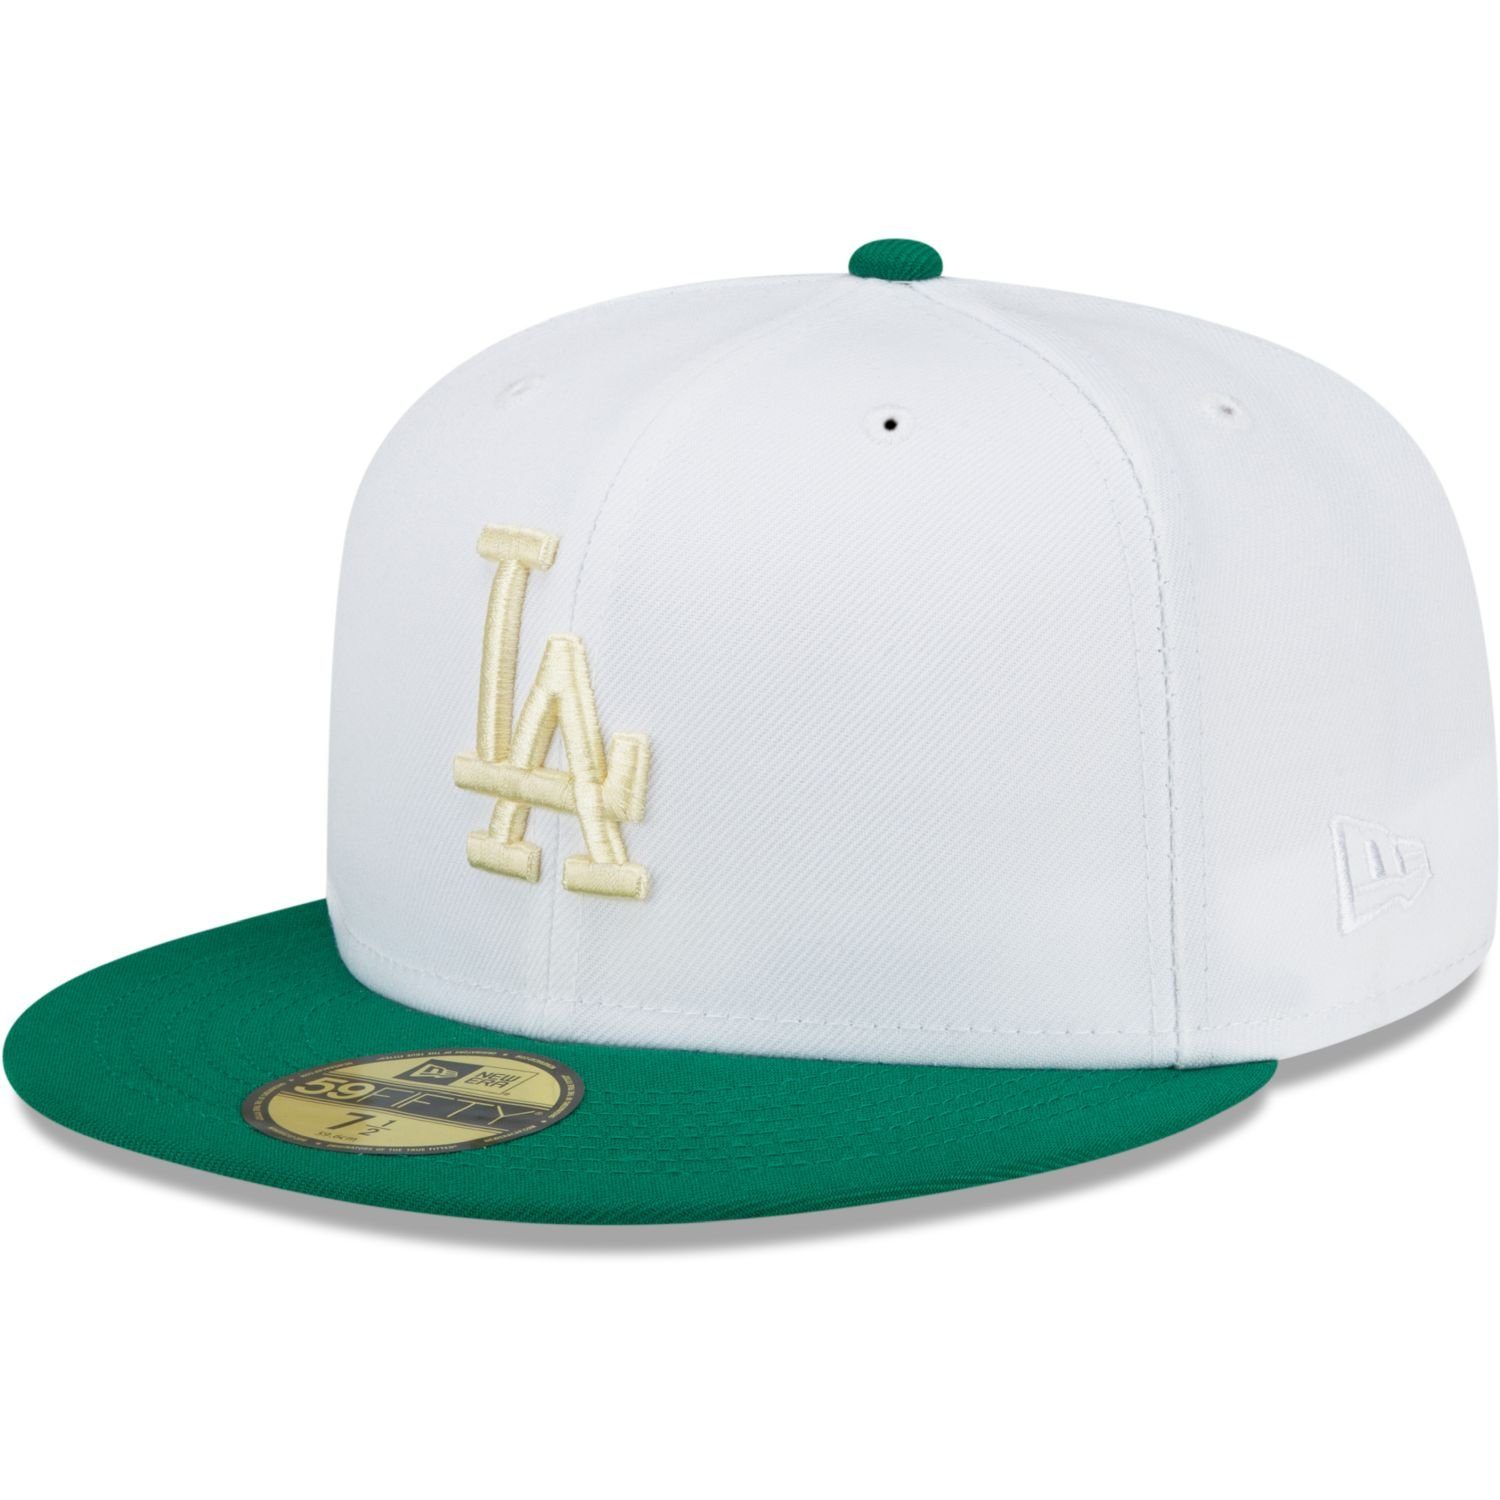 New Era Fitted Cap ANNIVERSARY 59Fifty Dodgers Los Angeles